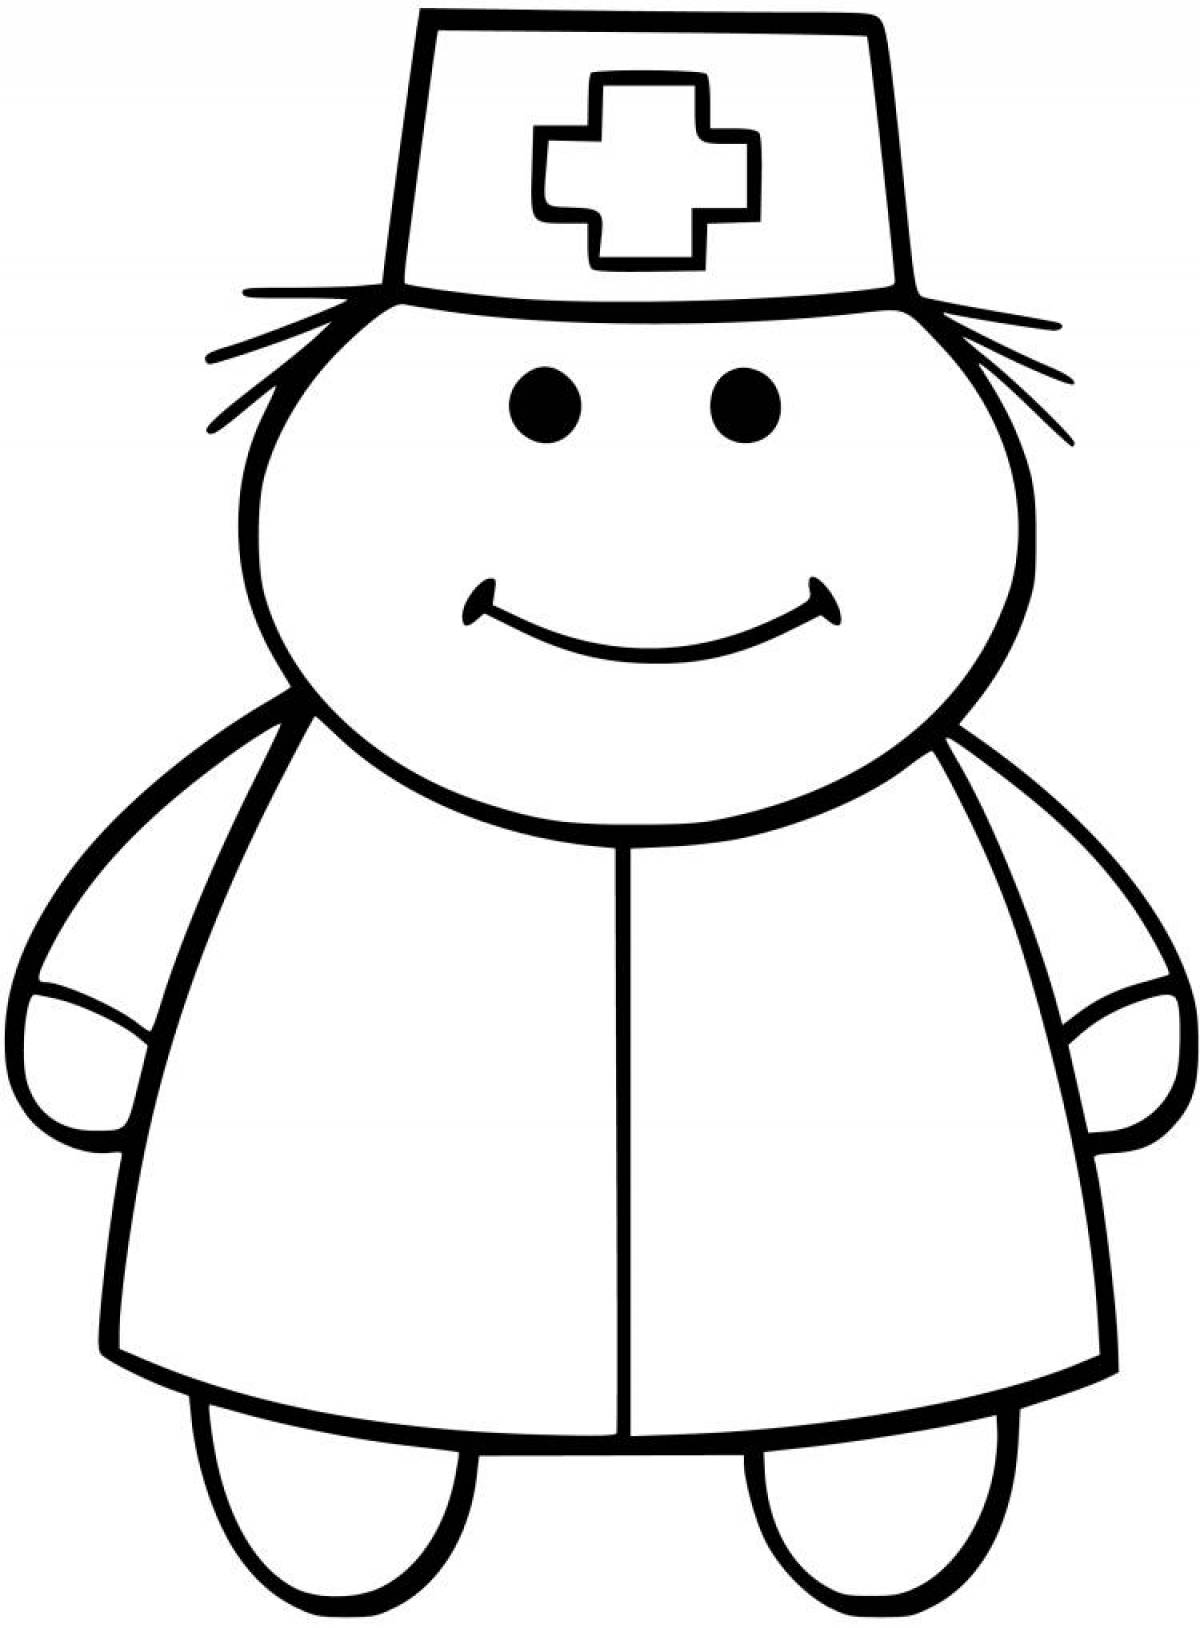 Colorful doctor coloring page for kids